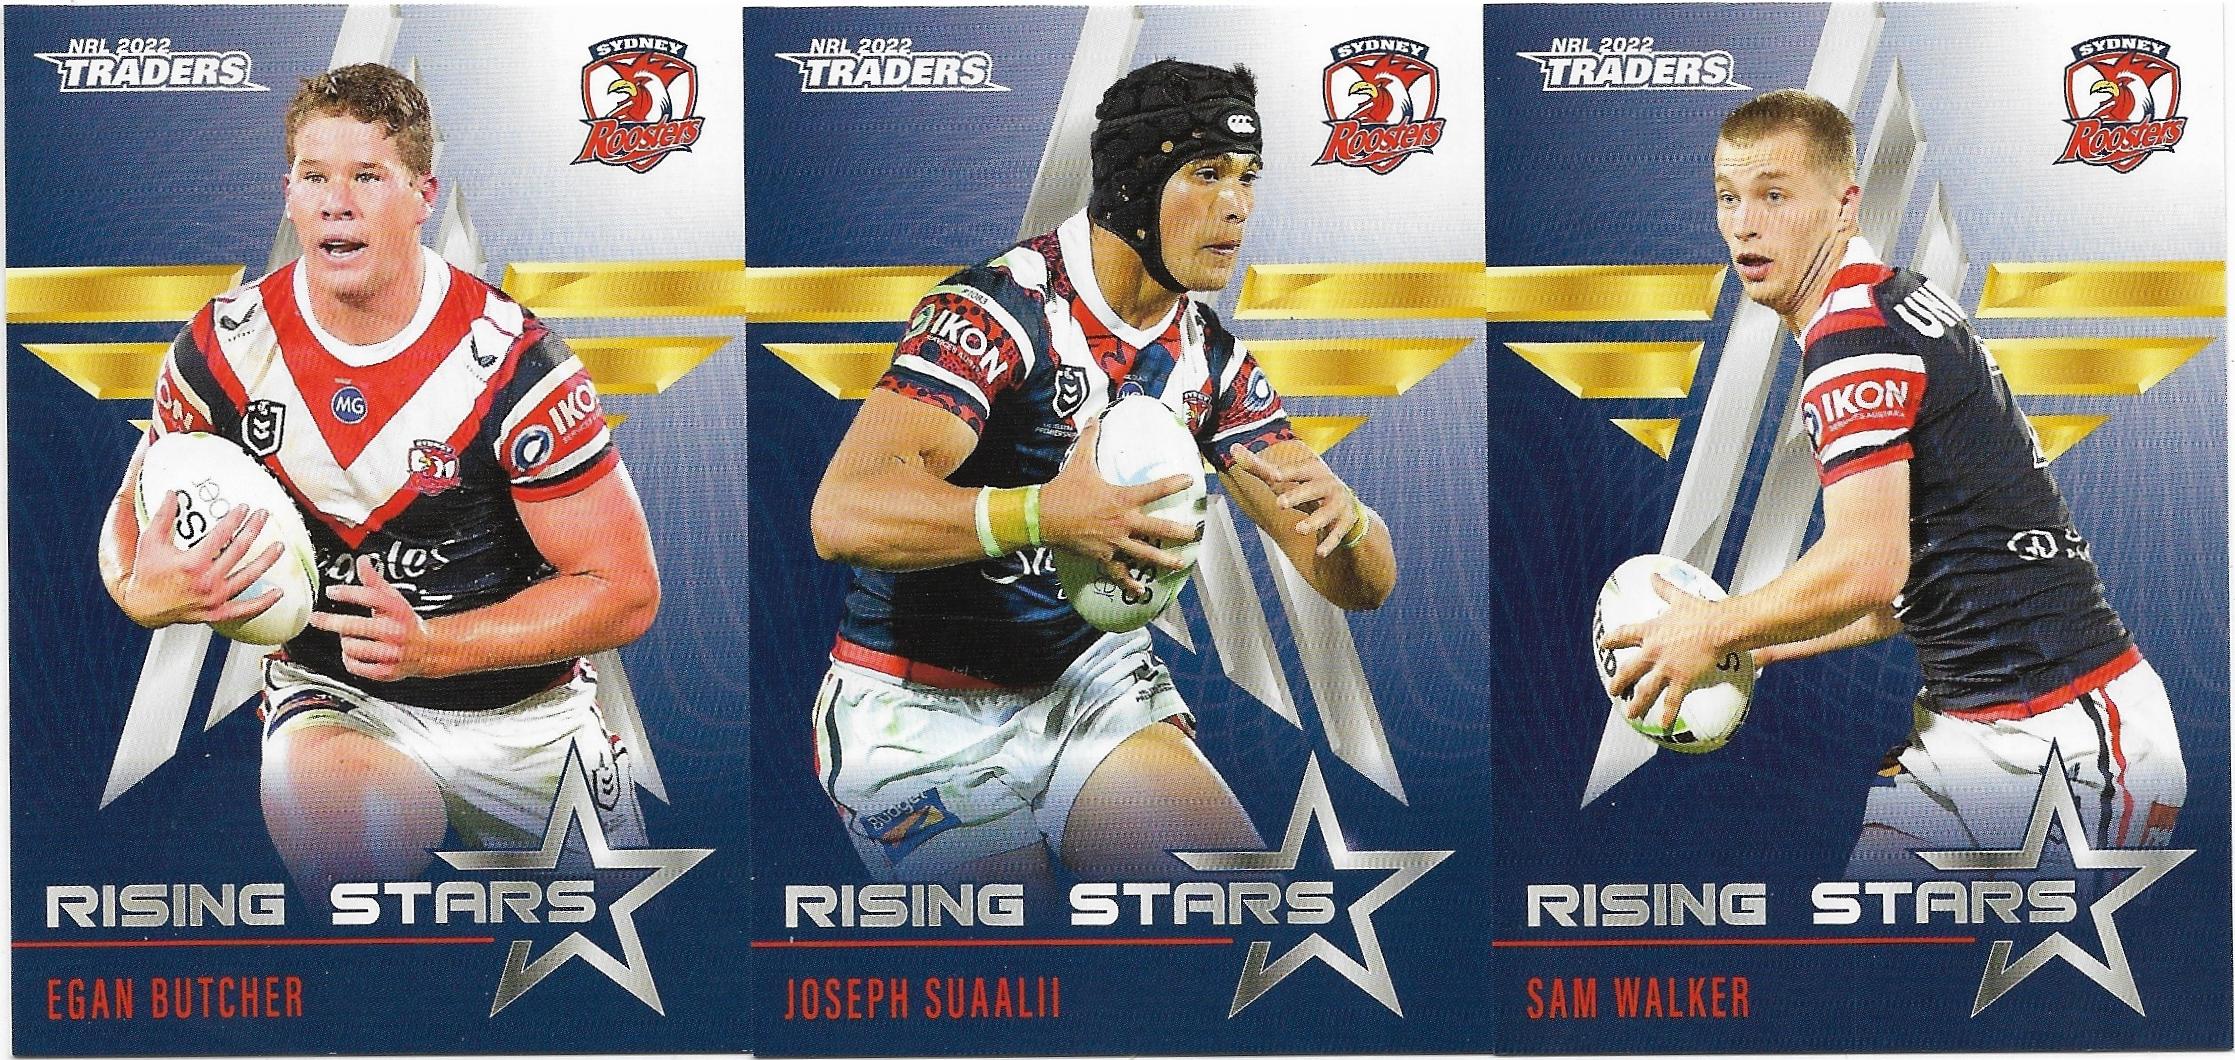 2022 Nrl Traders Rising Stars 3 Card Team Set – Roosters